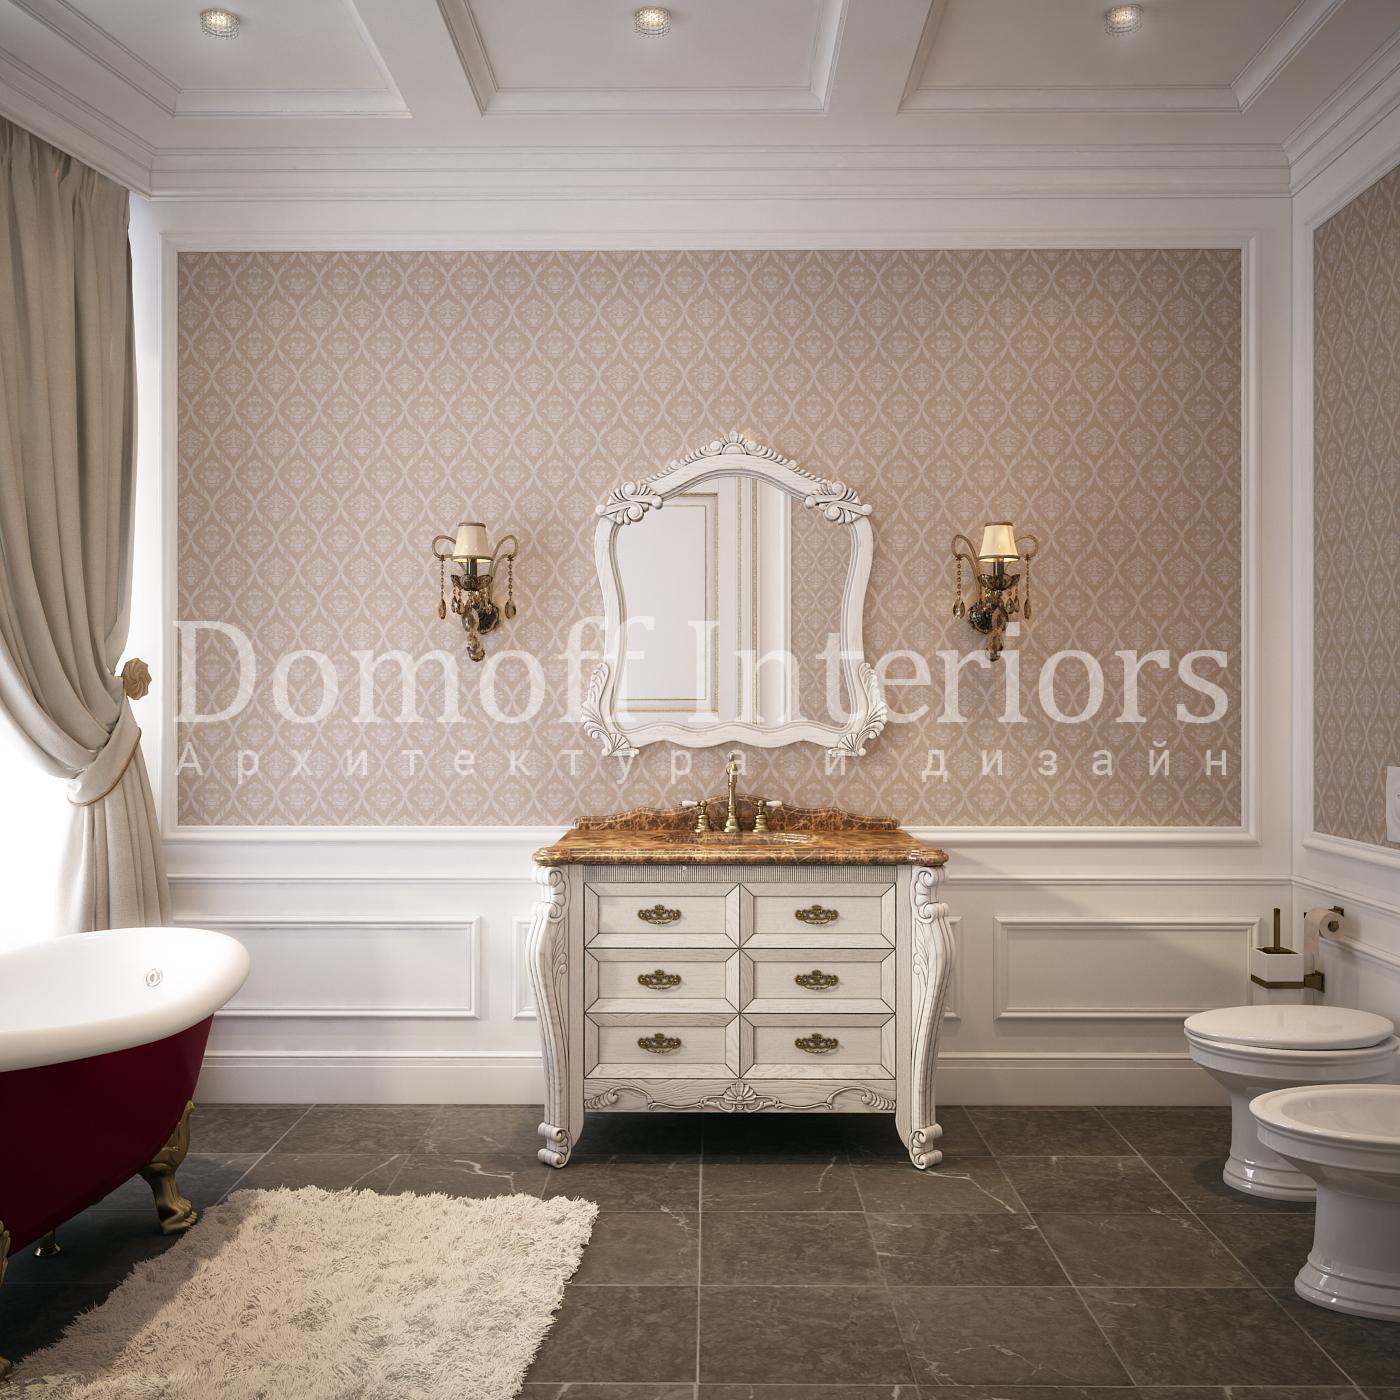 Guest room's bathroom made in the style of Contemporary classics